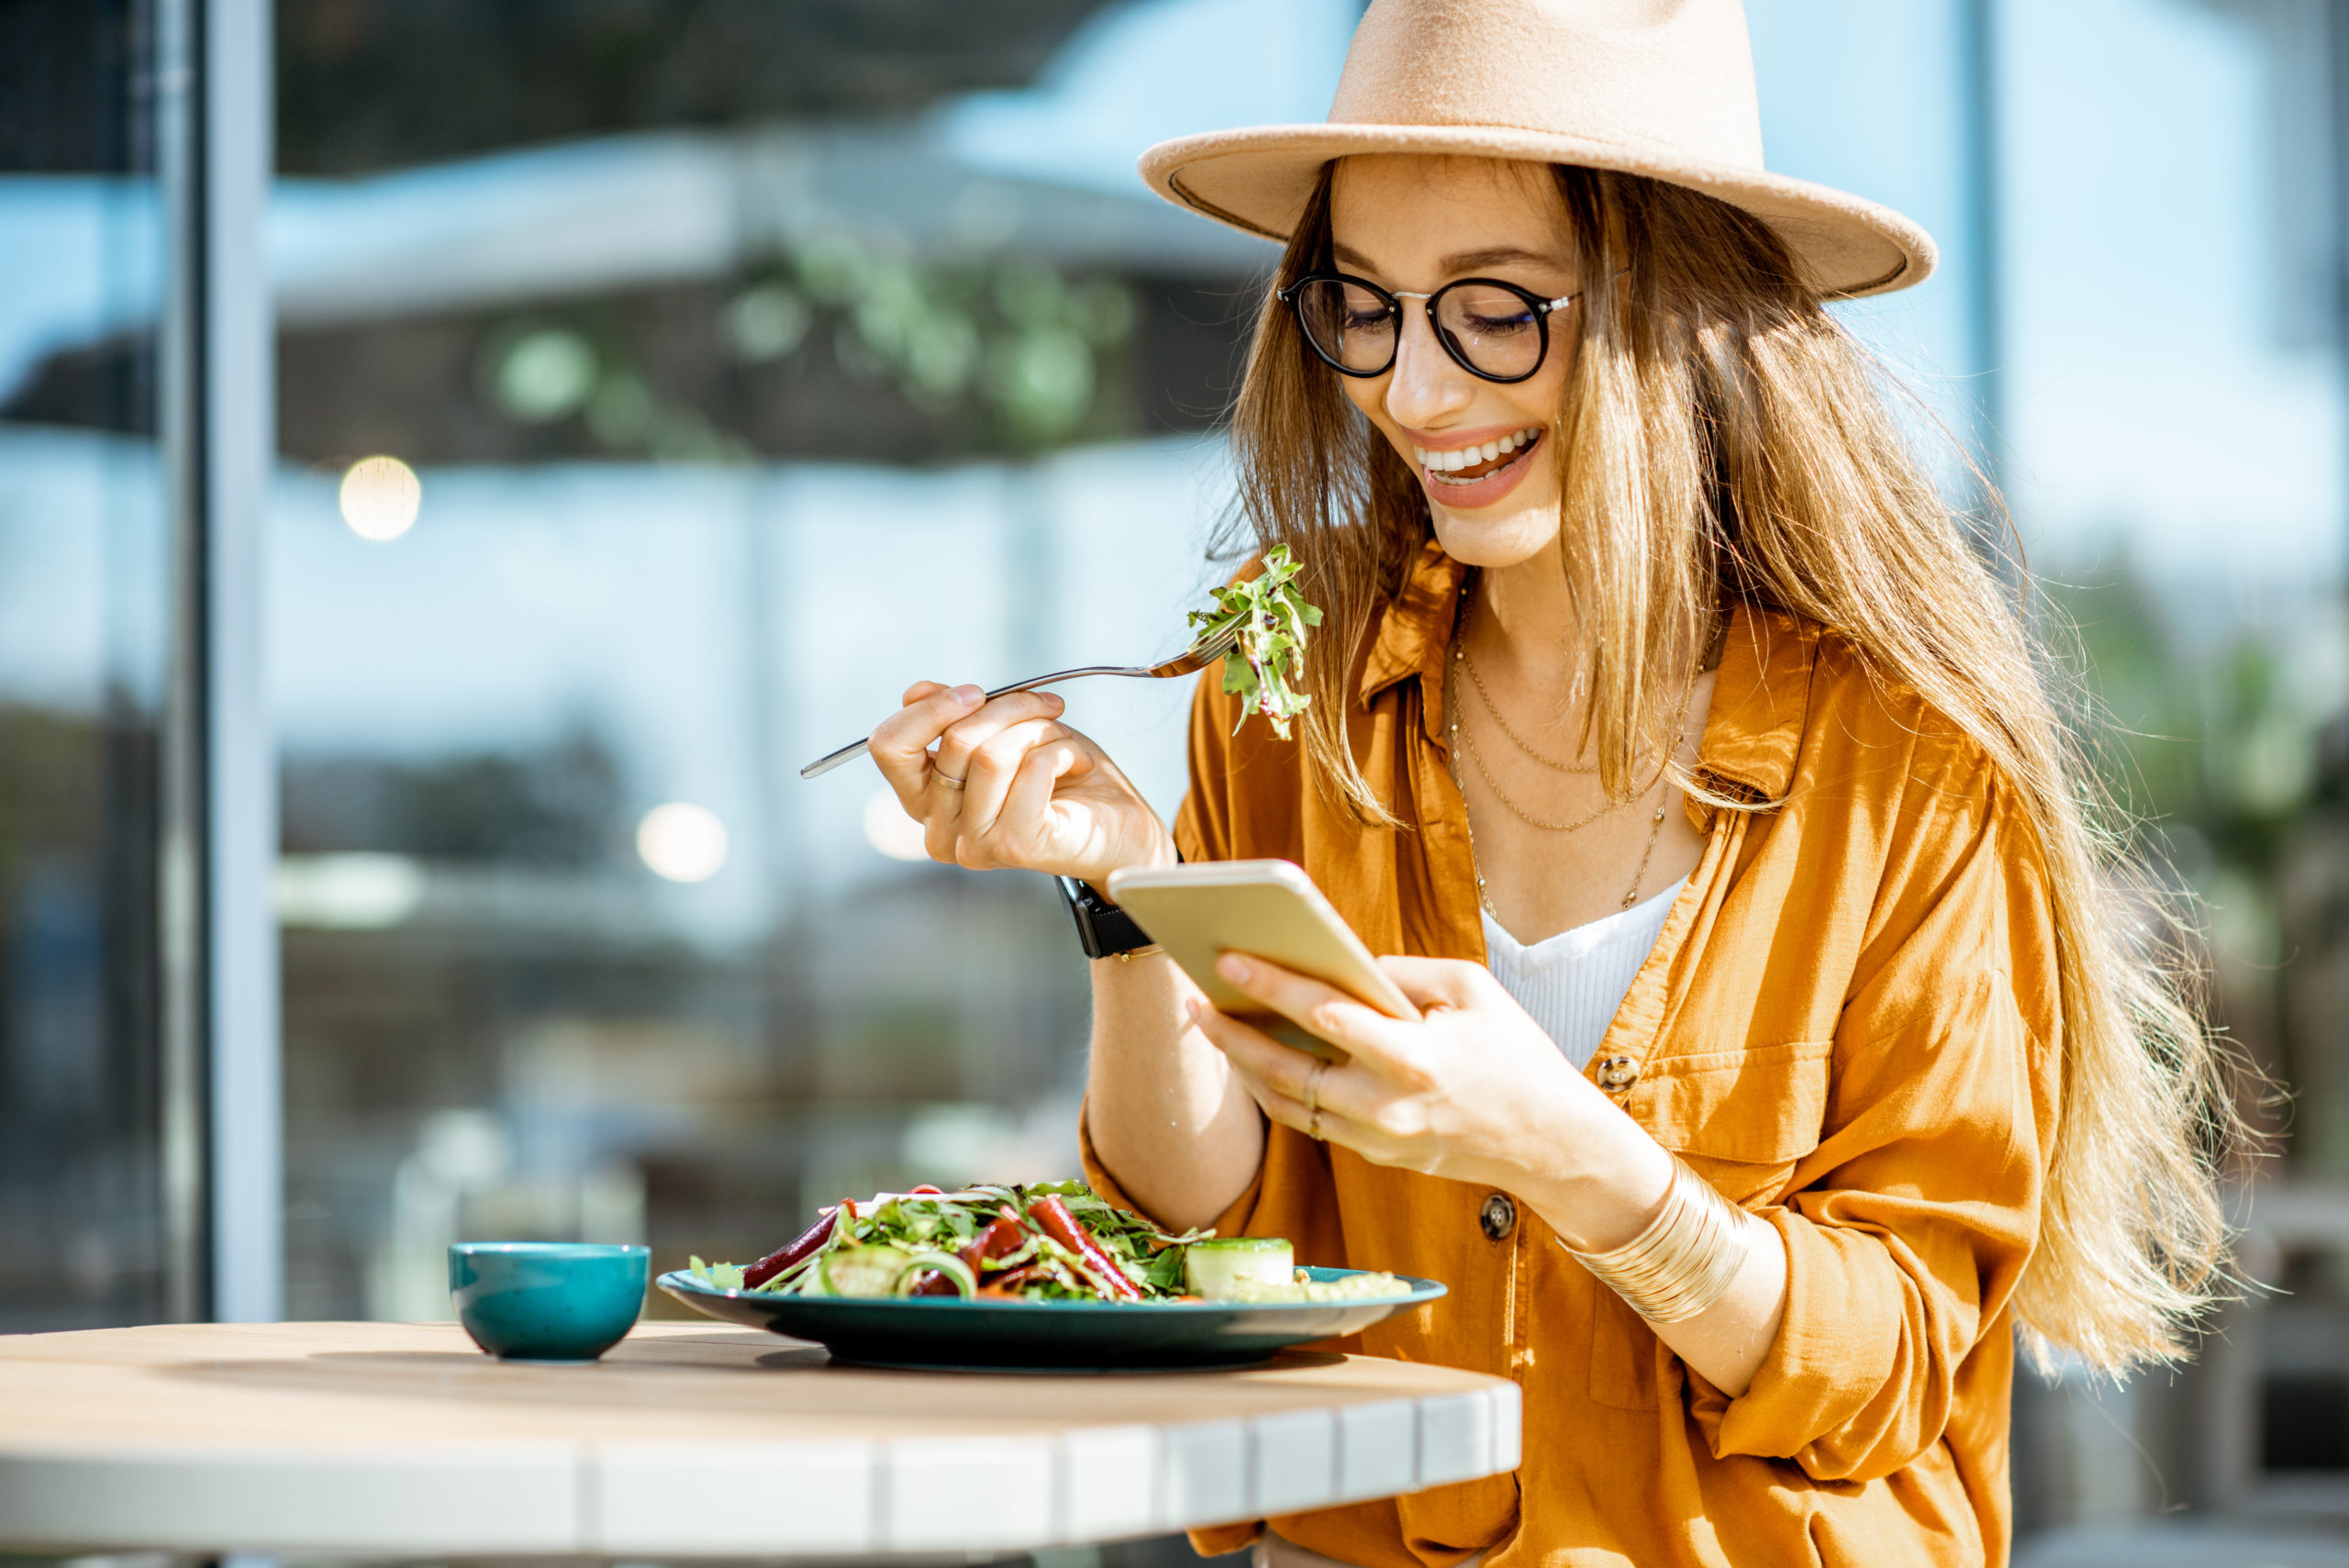 woman eating a salad according to her meal plan prepared by a nutritionist